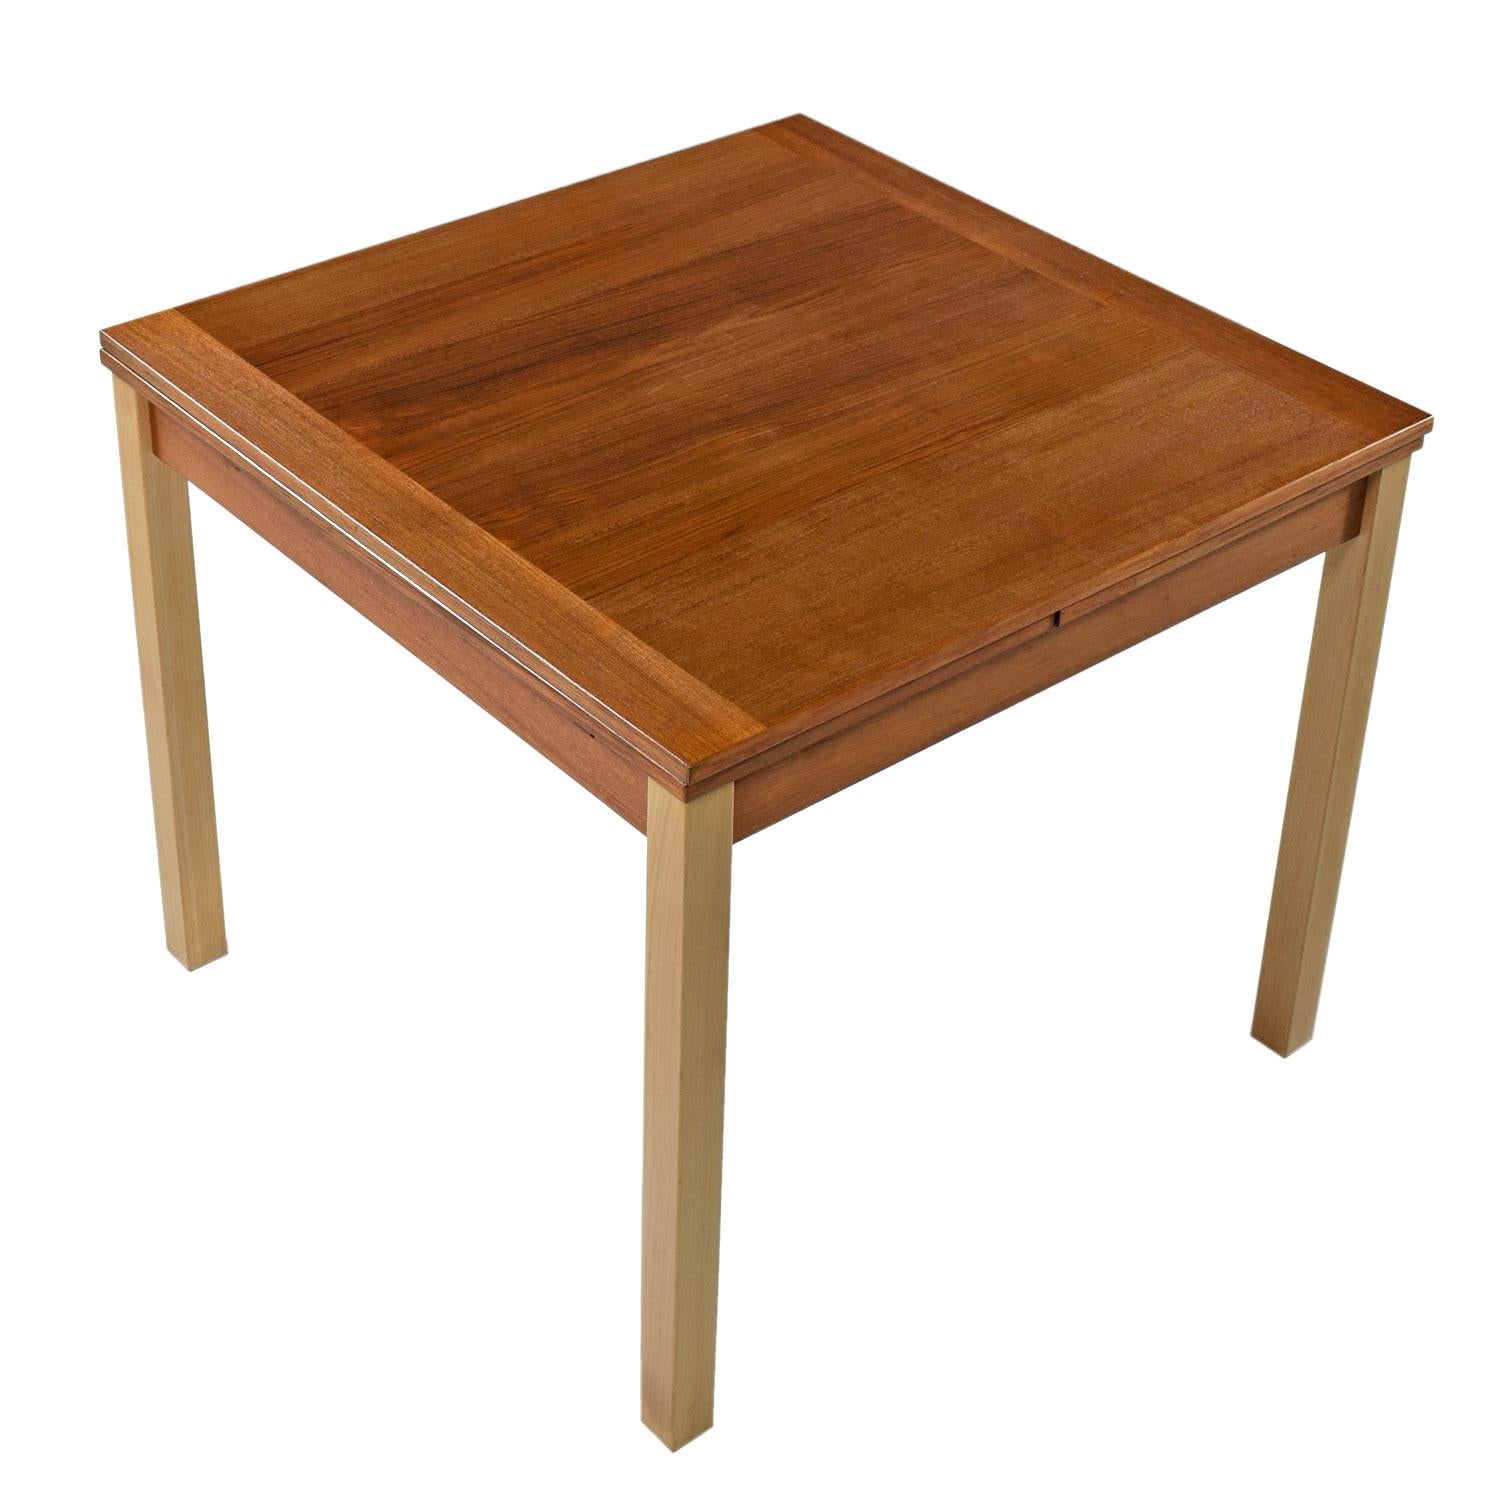 Made by Ansager Mobler, circa 1970s. The contrasting butcher block style wood grain on the leafs enhance the simple and Minimalist nature of this Scandinavian design. Teak top with light colored beechwood legs. Consider pairing this dining table